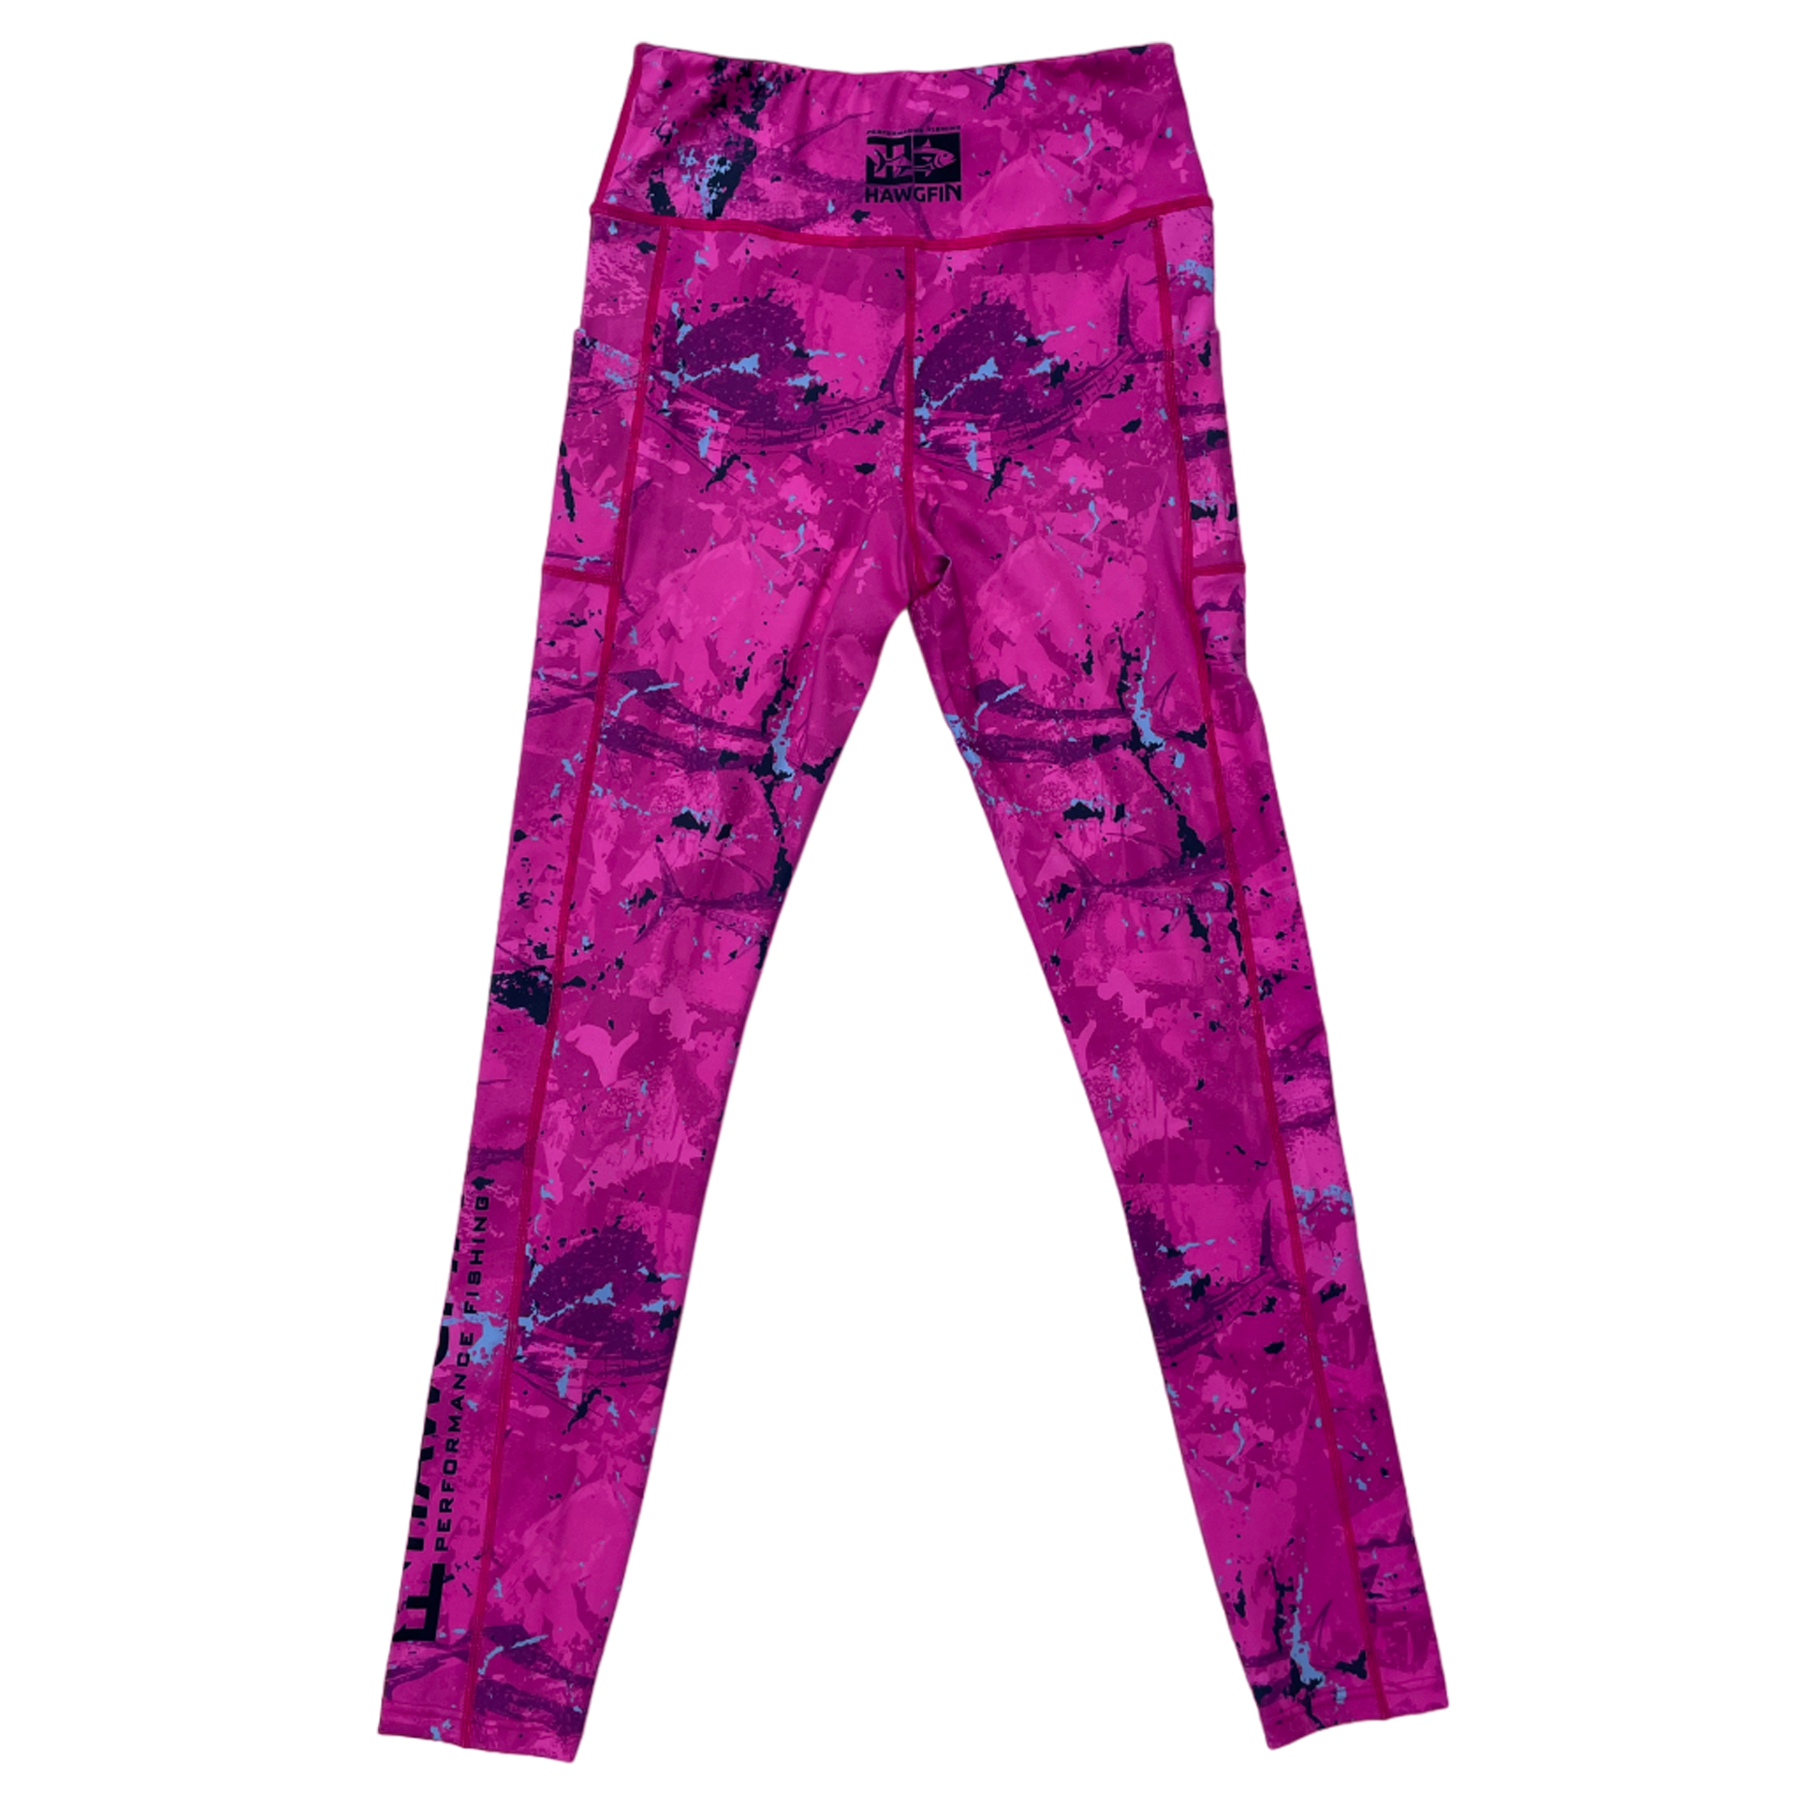 Pcheebum Hot Pink Camo Seamless Leggings Size S - $38 New With Tags - From  Maria